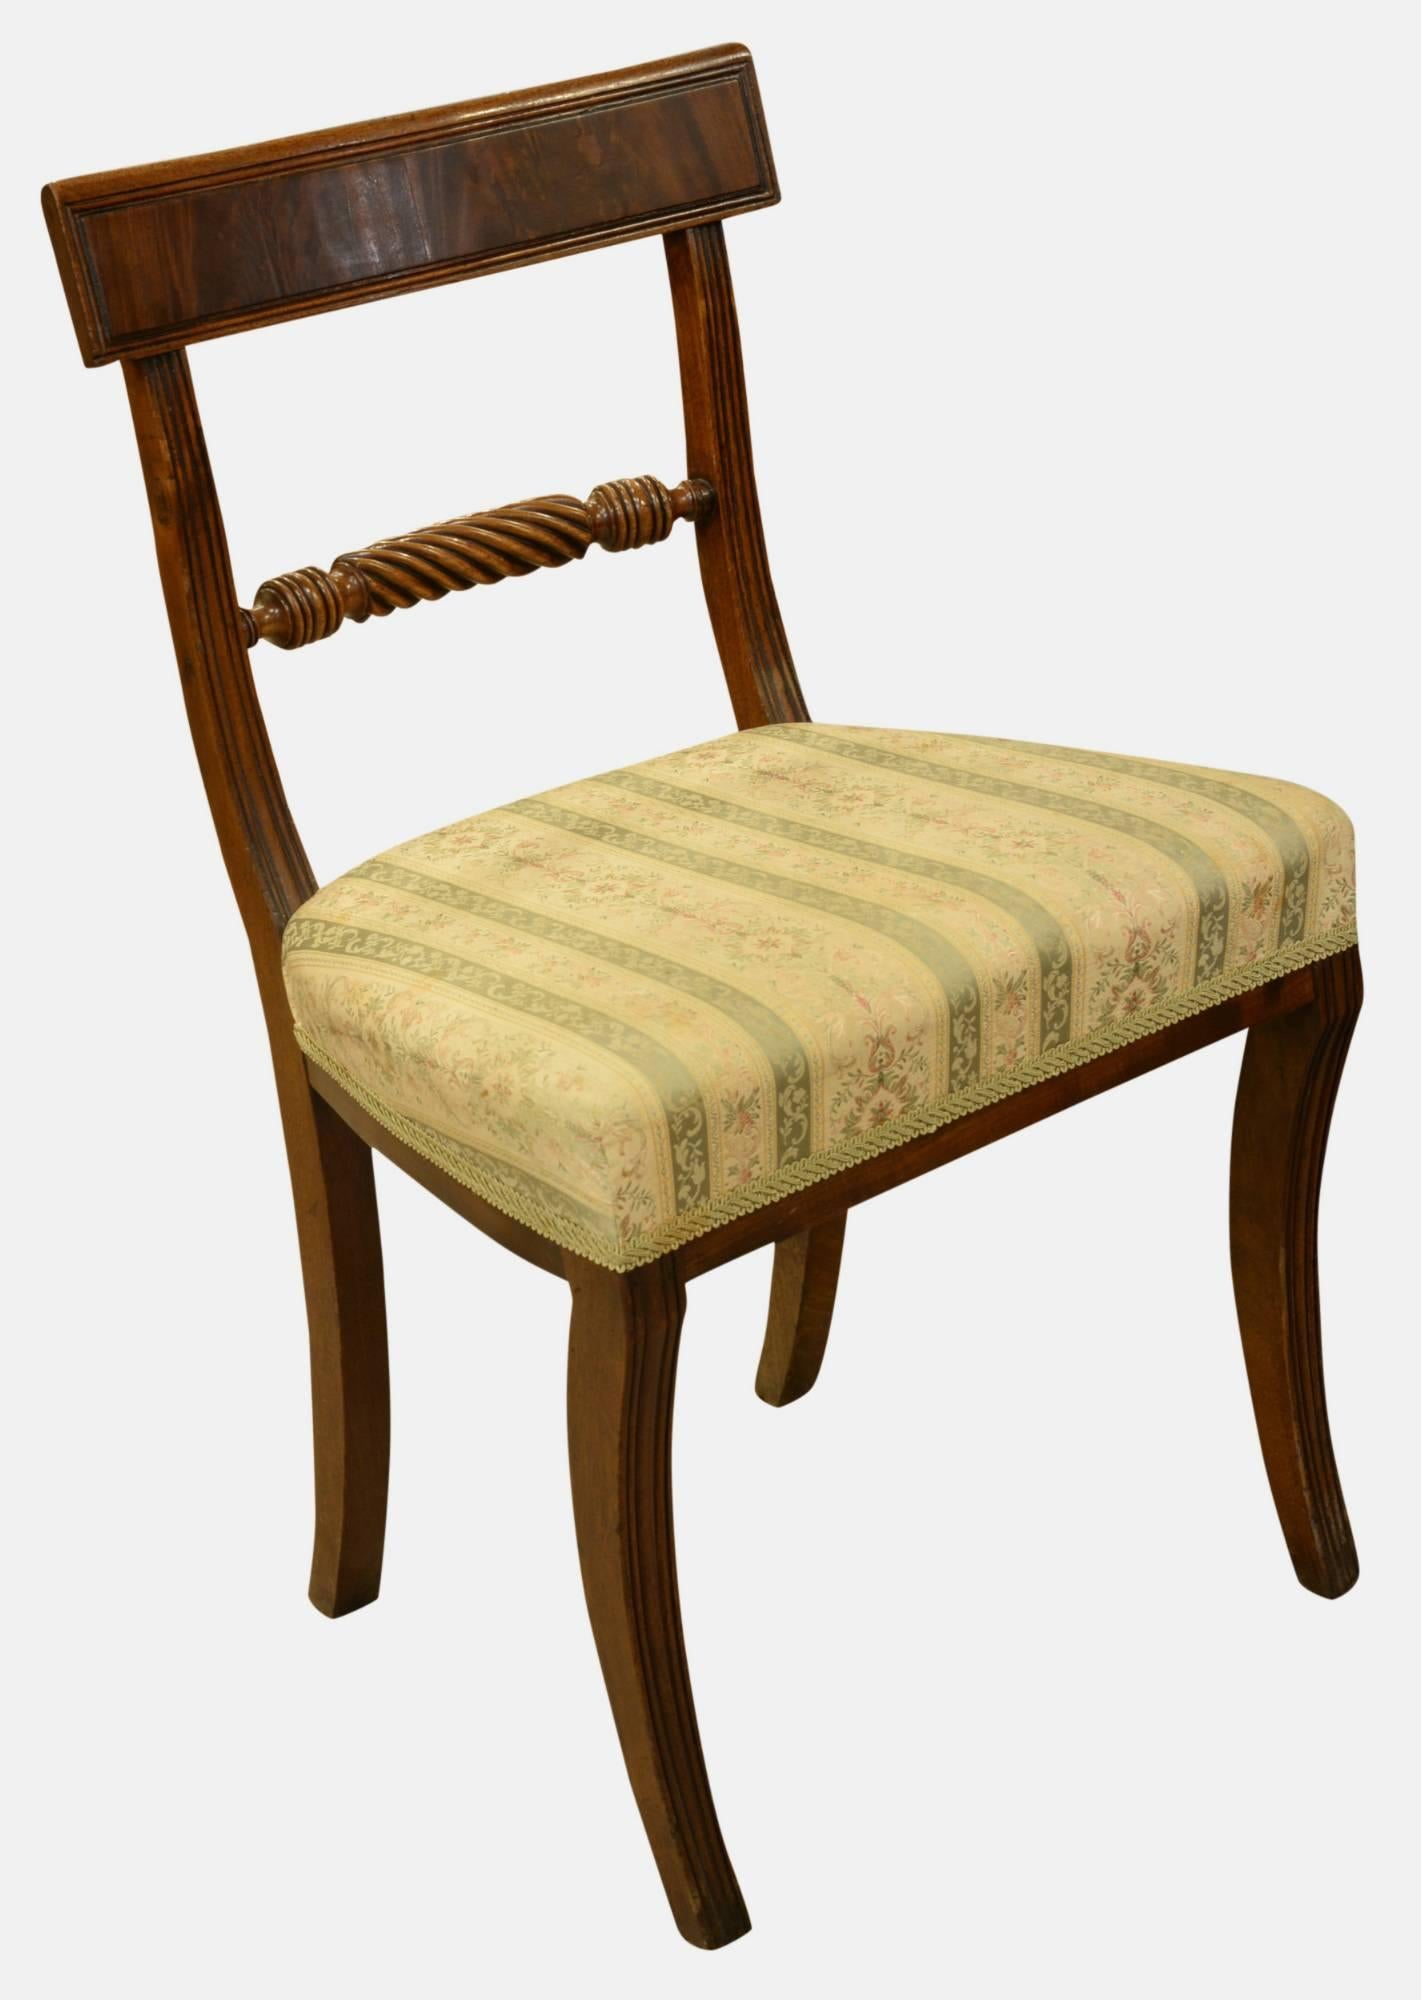 A set of 6 regency period, rope back, sabre leg dining chairs,

circa 1810.